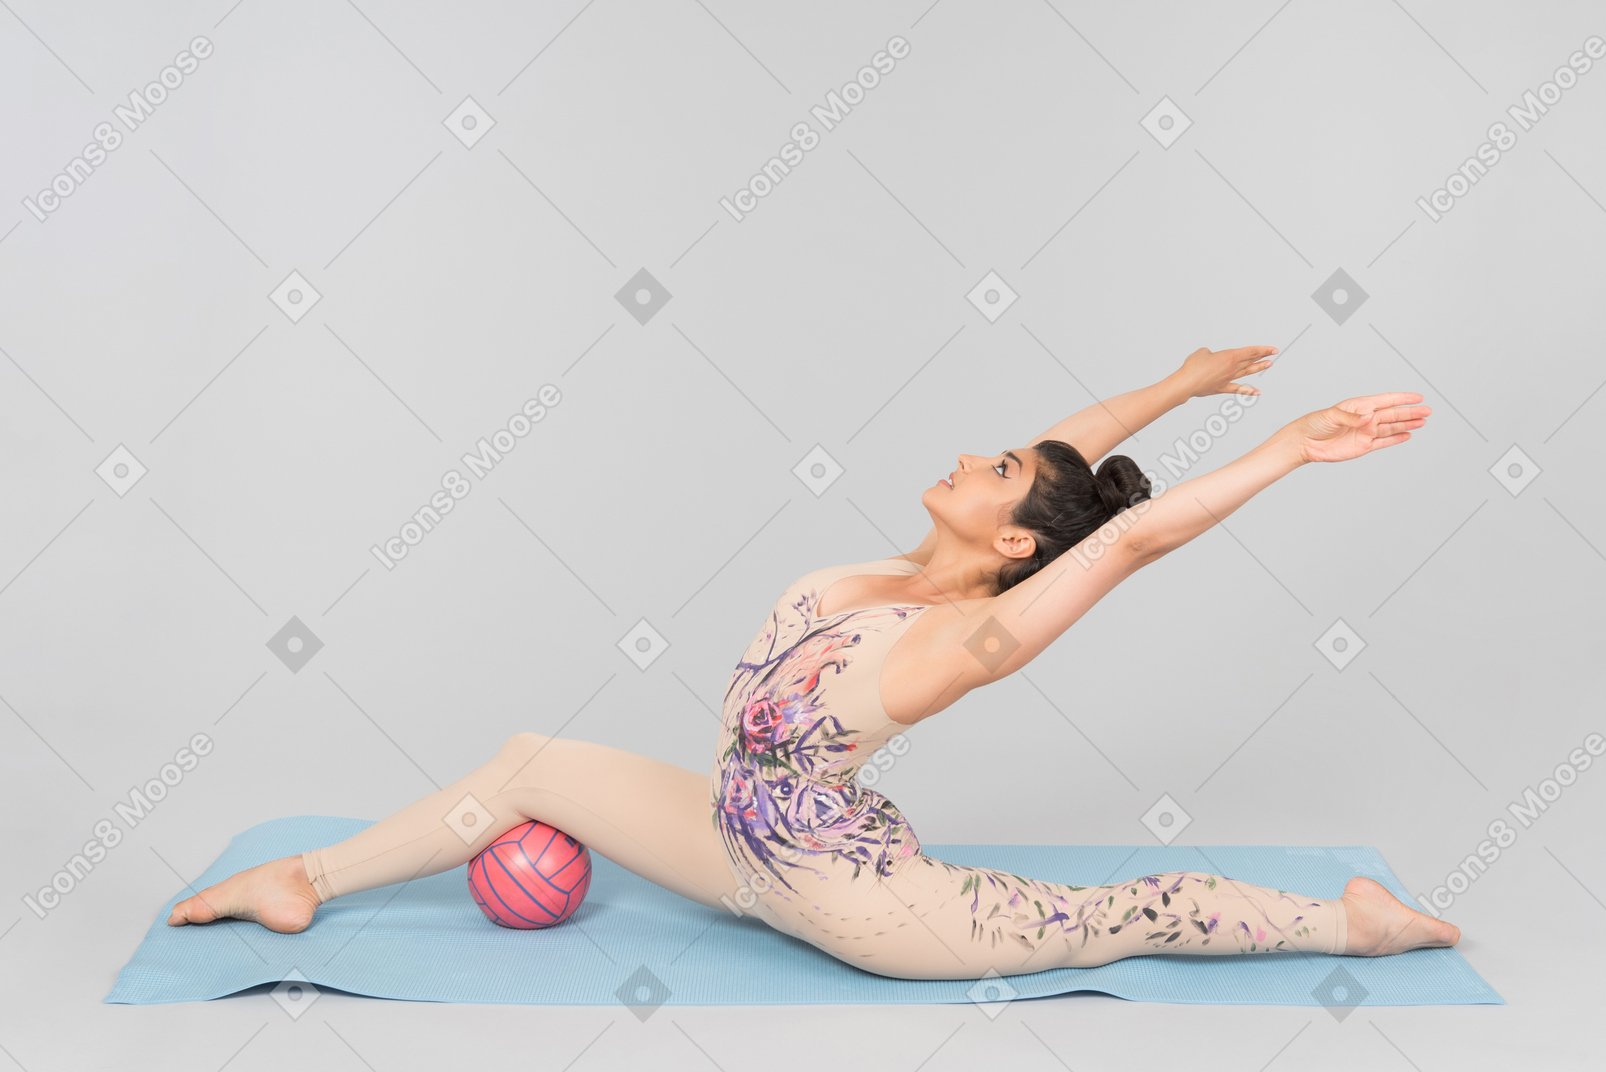 Young indian gymnast sitting on yoga mat and stretching body